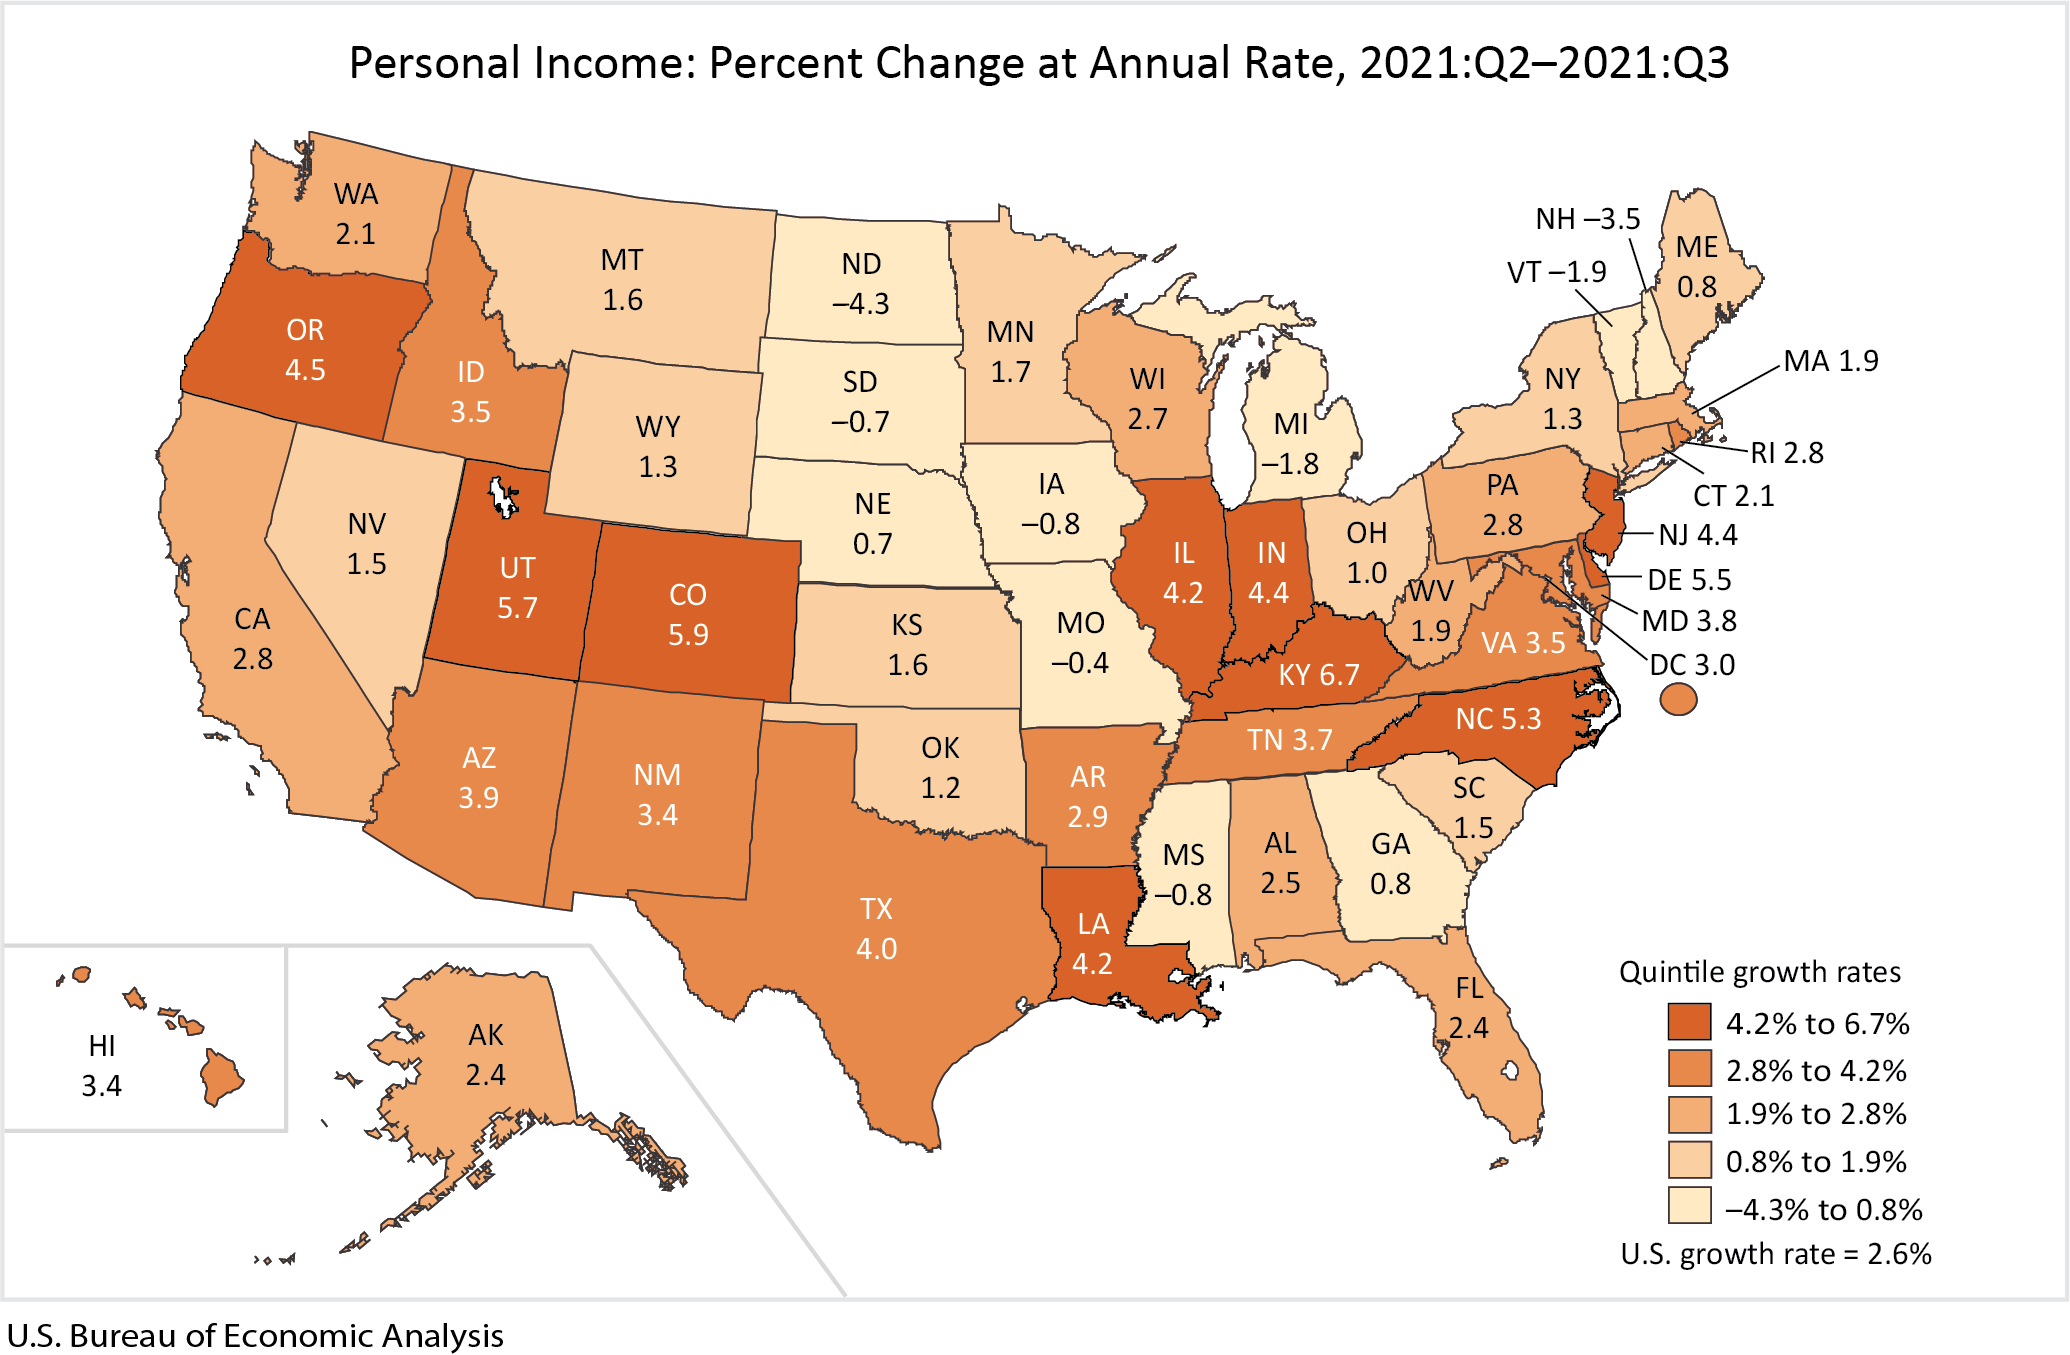 Personal Income: Percent Change at Annual Rate, 2021:Q2-2021:Q3